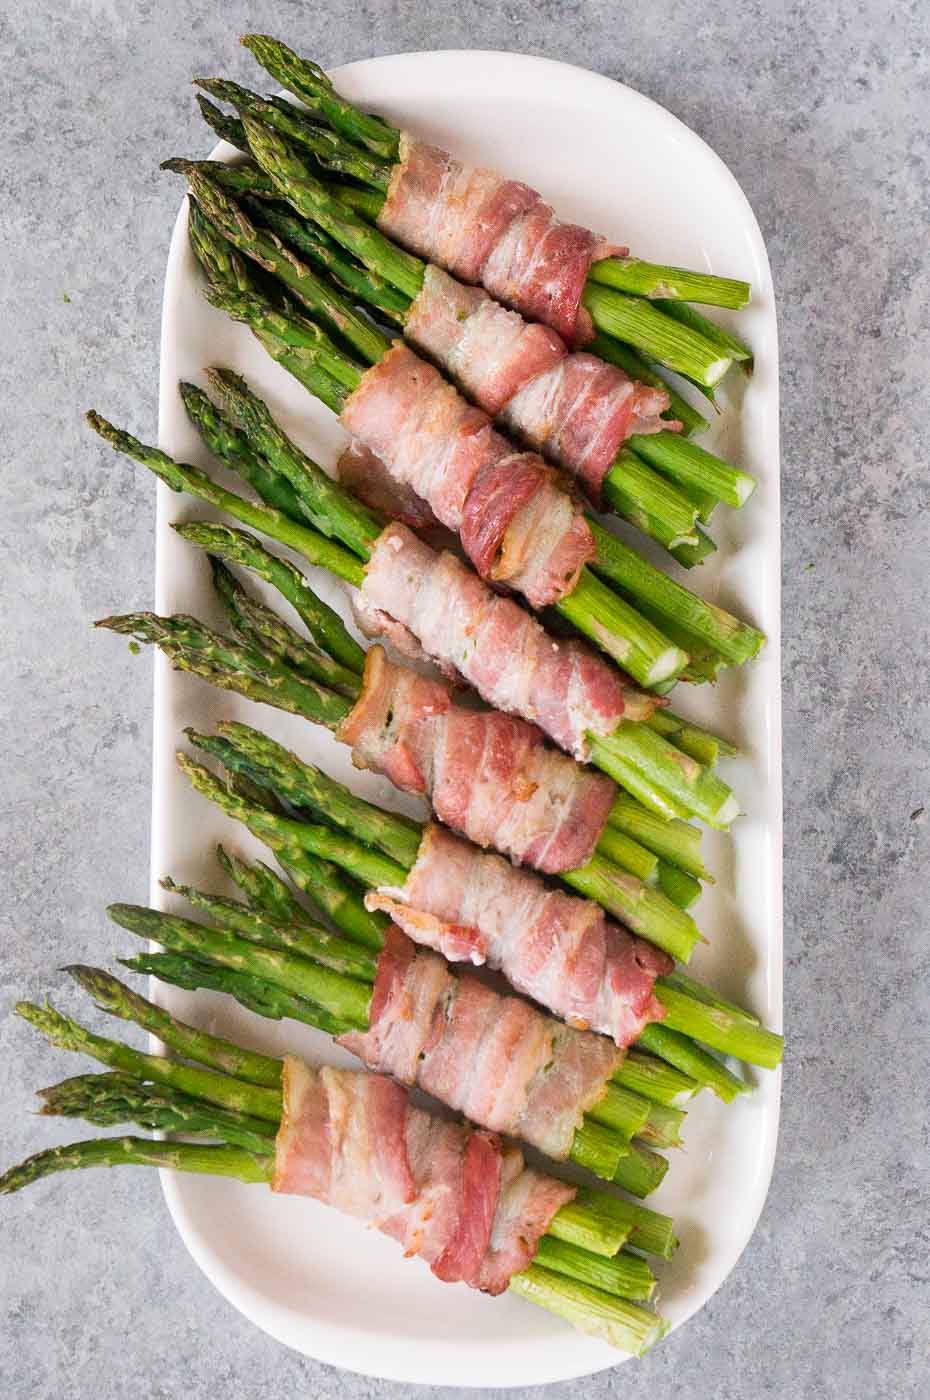 asparagus wrapped in bacon on a plate